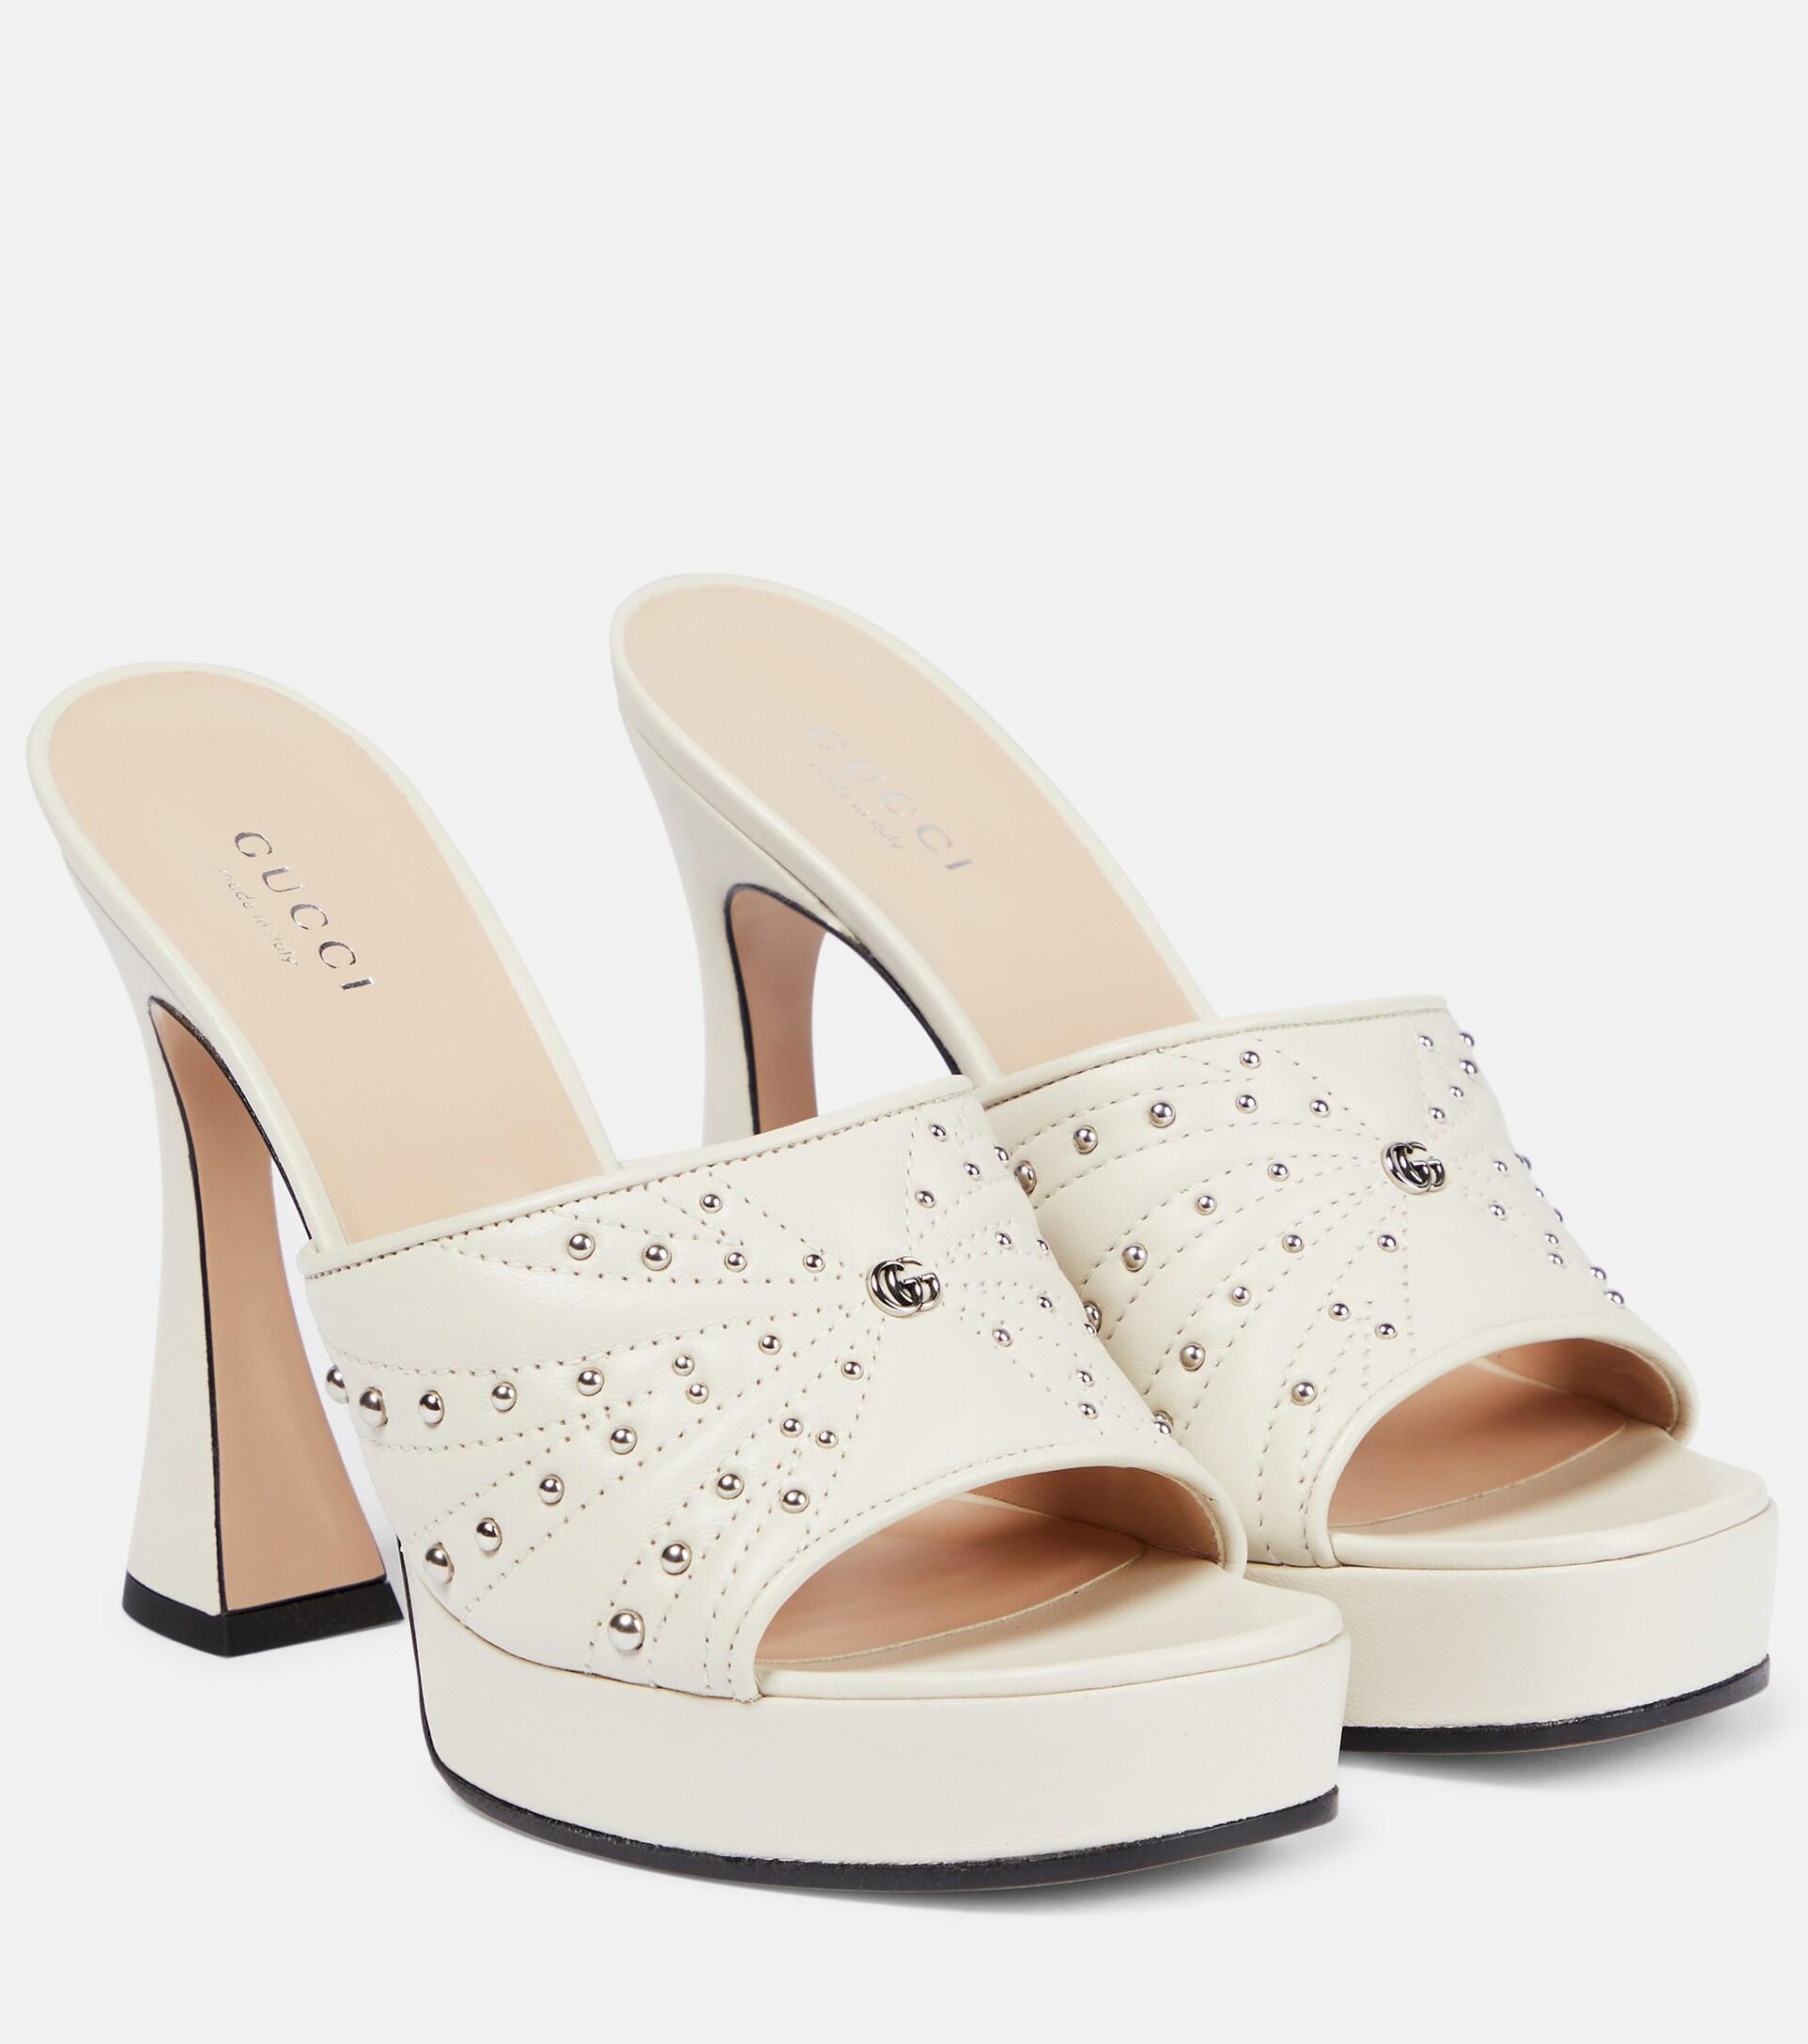 Gucci Embellished Quilted Leather Sandals in White | Lyst